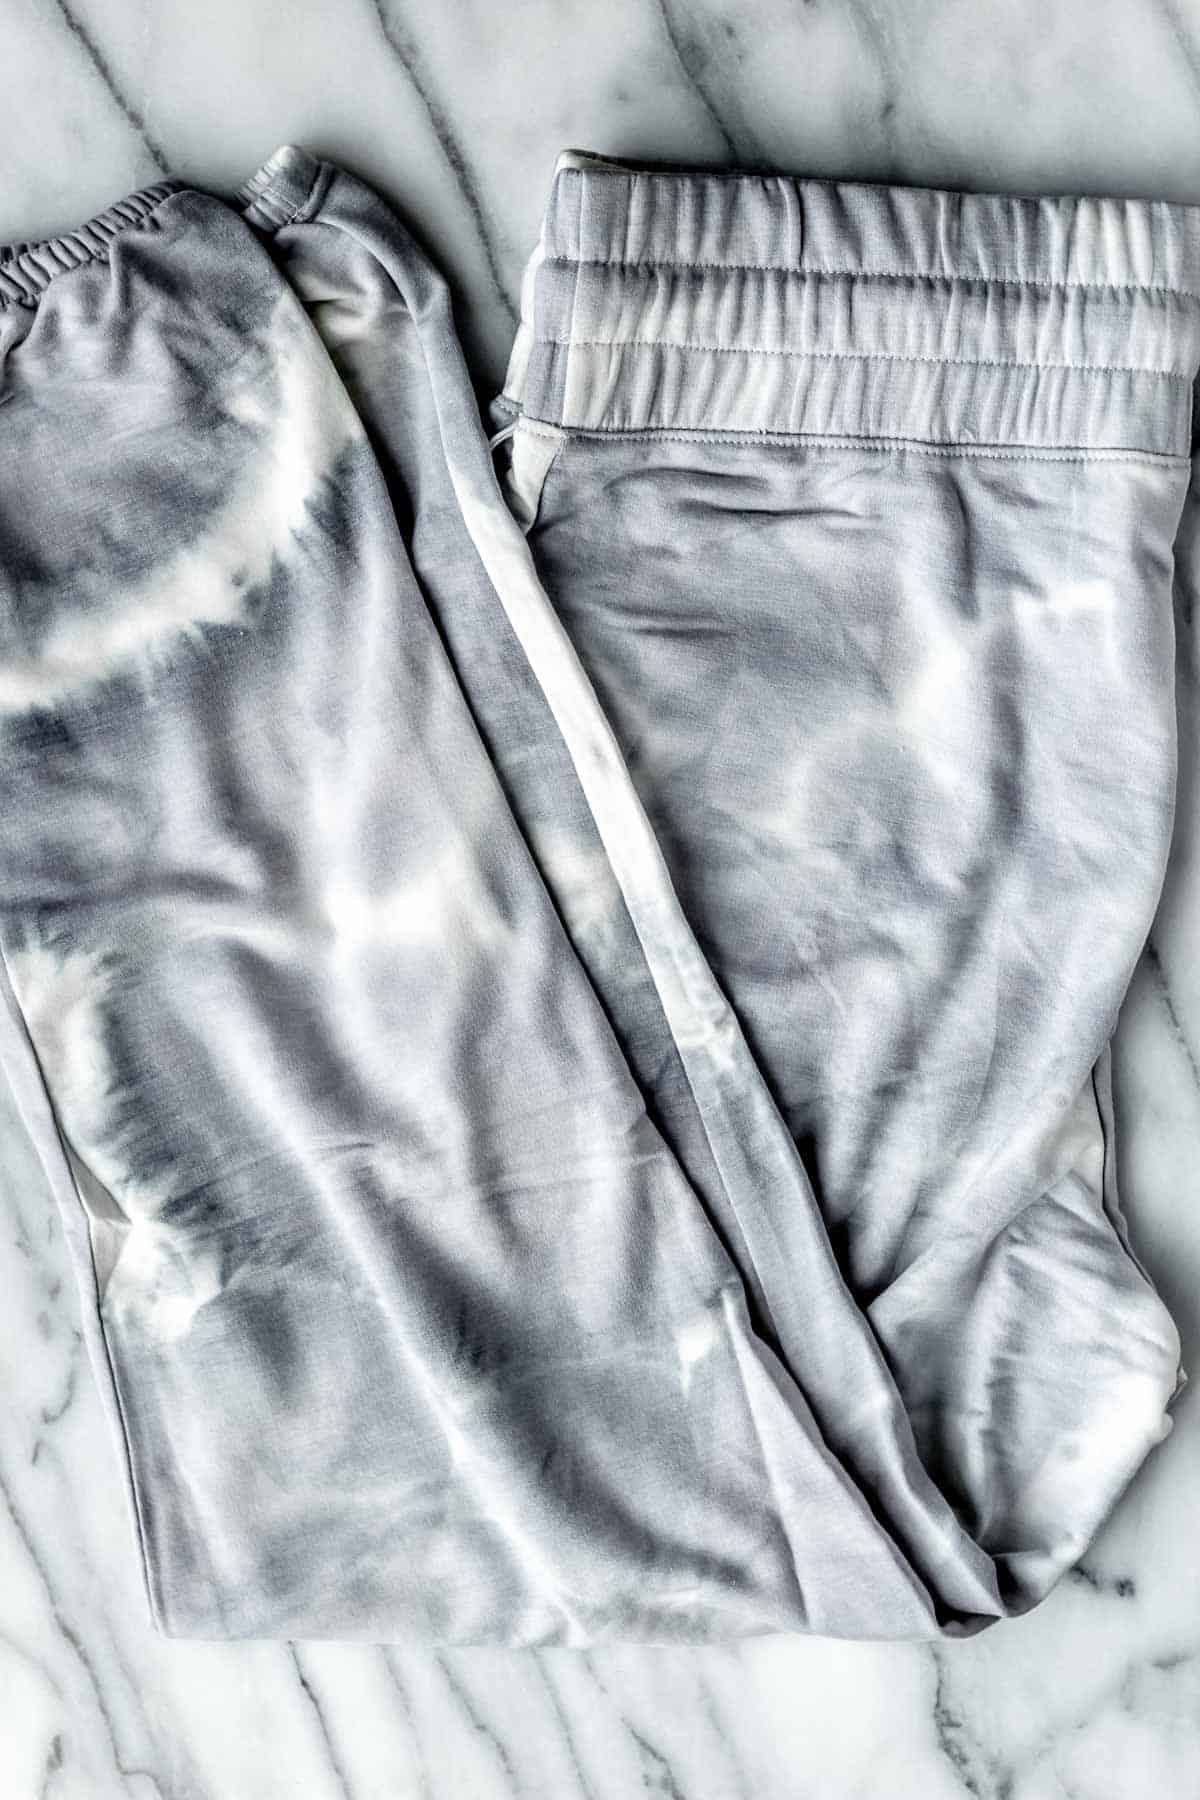 Balance Collection Tie-Dye Jogger in gray on a marble background.